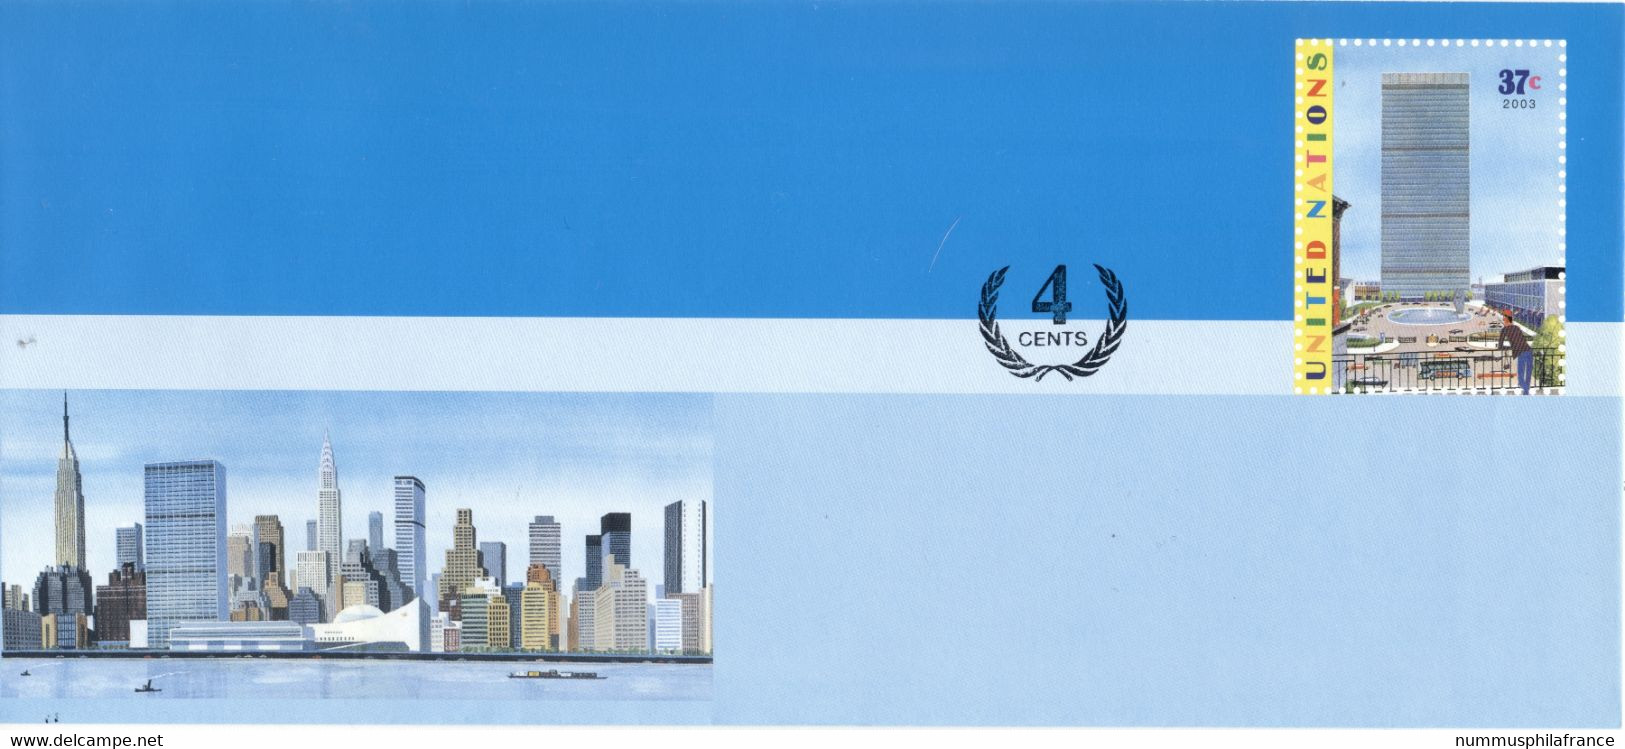 Nations Unies New York  2007 - Entier Postal 41 Centimes - Covers & Documents